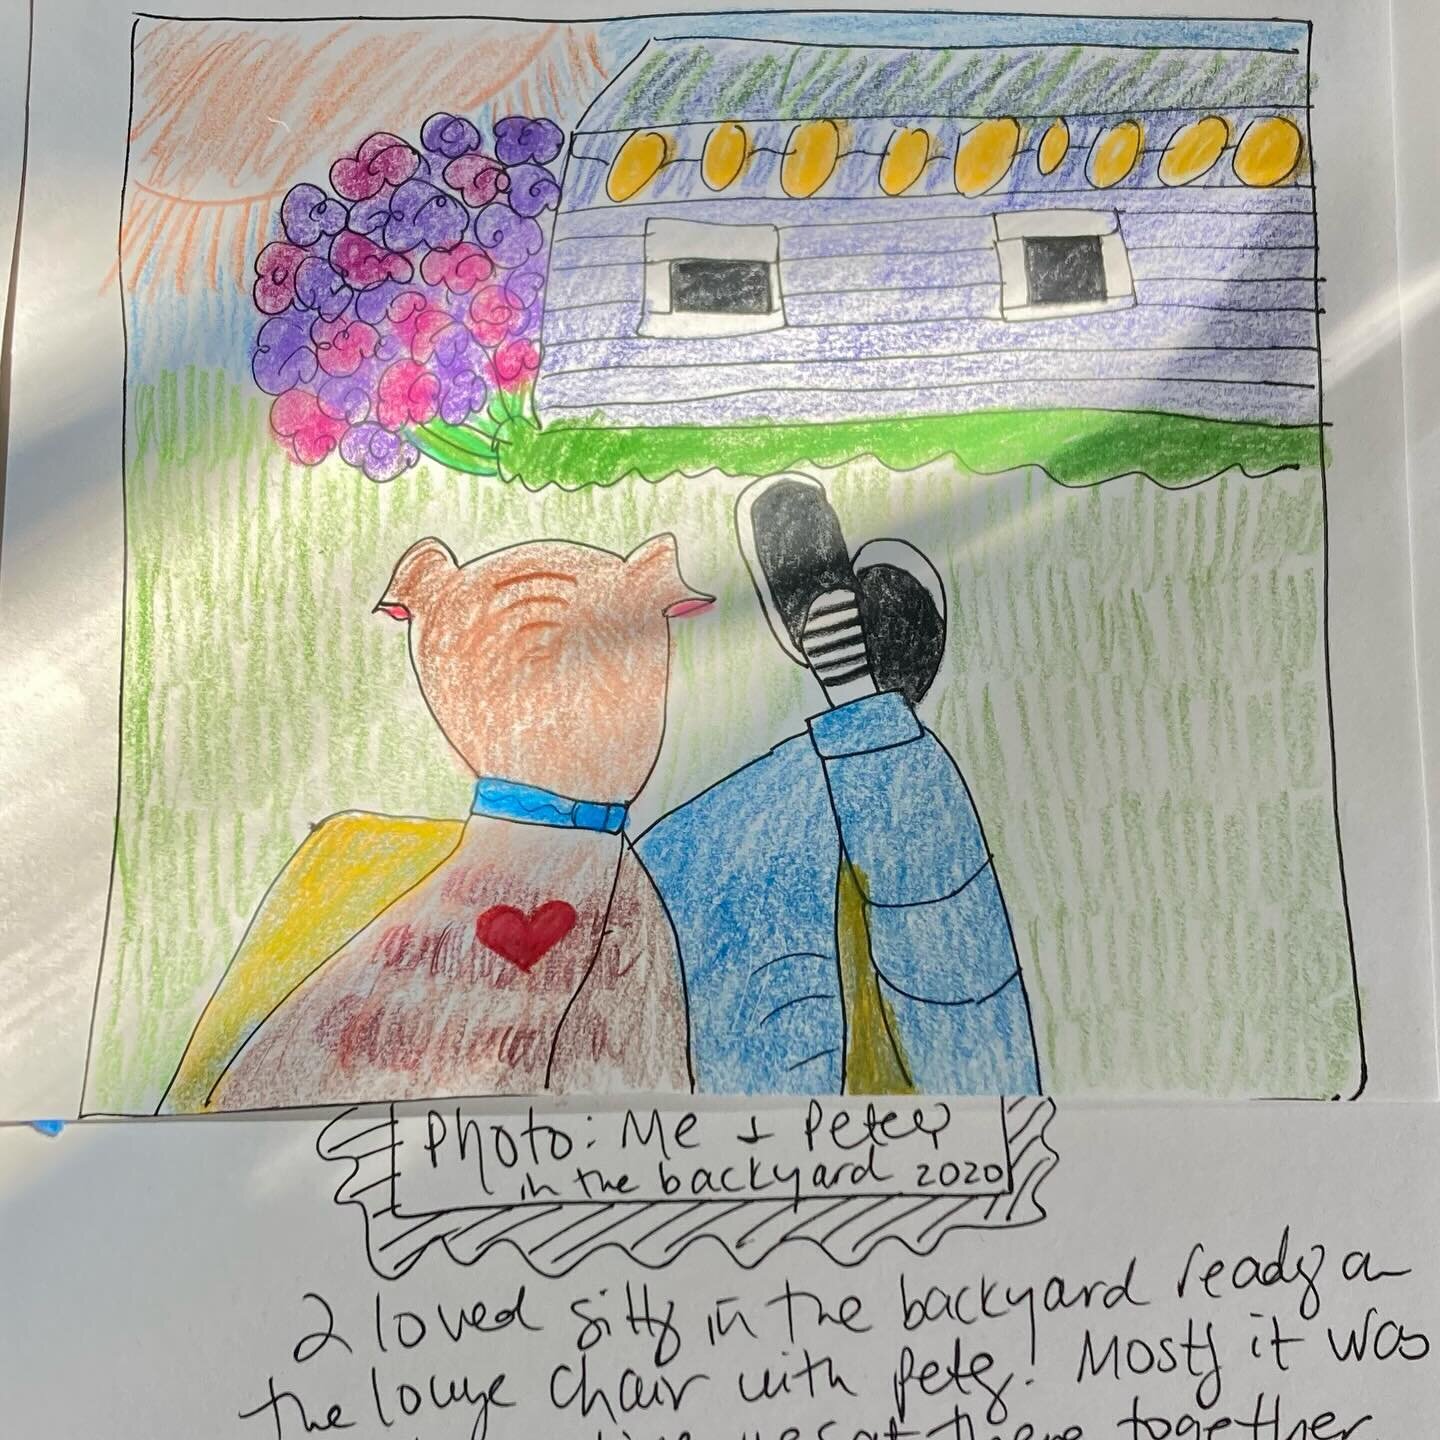 Was so nice to dip back into #drawtogethergut with @wendymac and the How To See More with Dorothea Lange lesson. It was such a treat. I chose an old photograph of me and Petey in the backyard on his lounge chair, enjoying the view. Five minute drawin